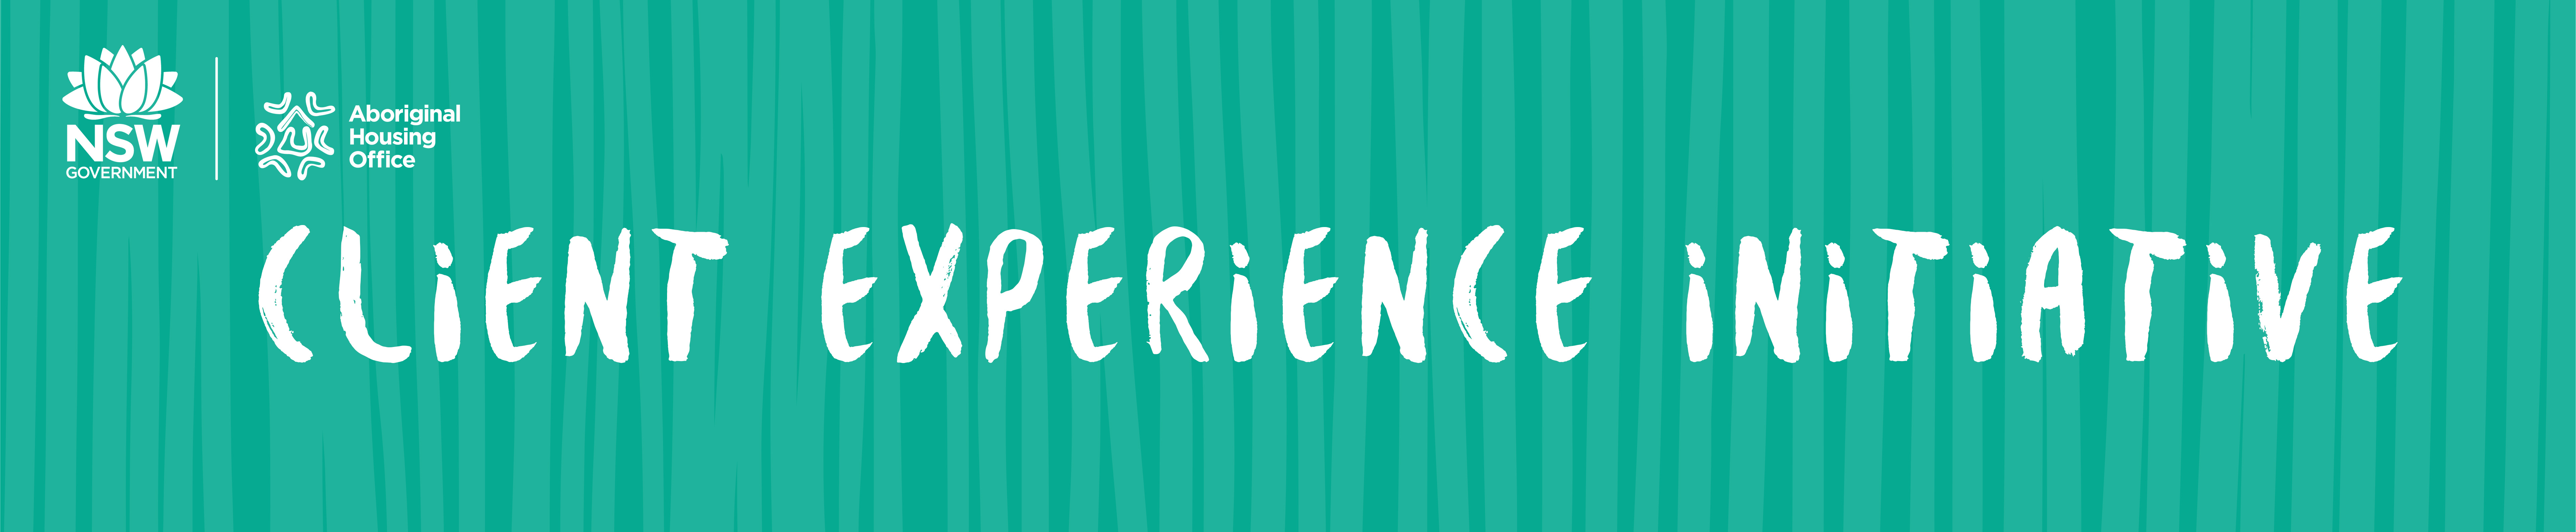 CVlient Experience Banner